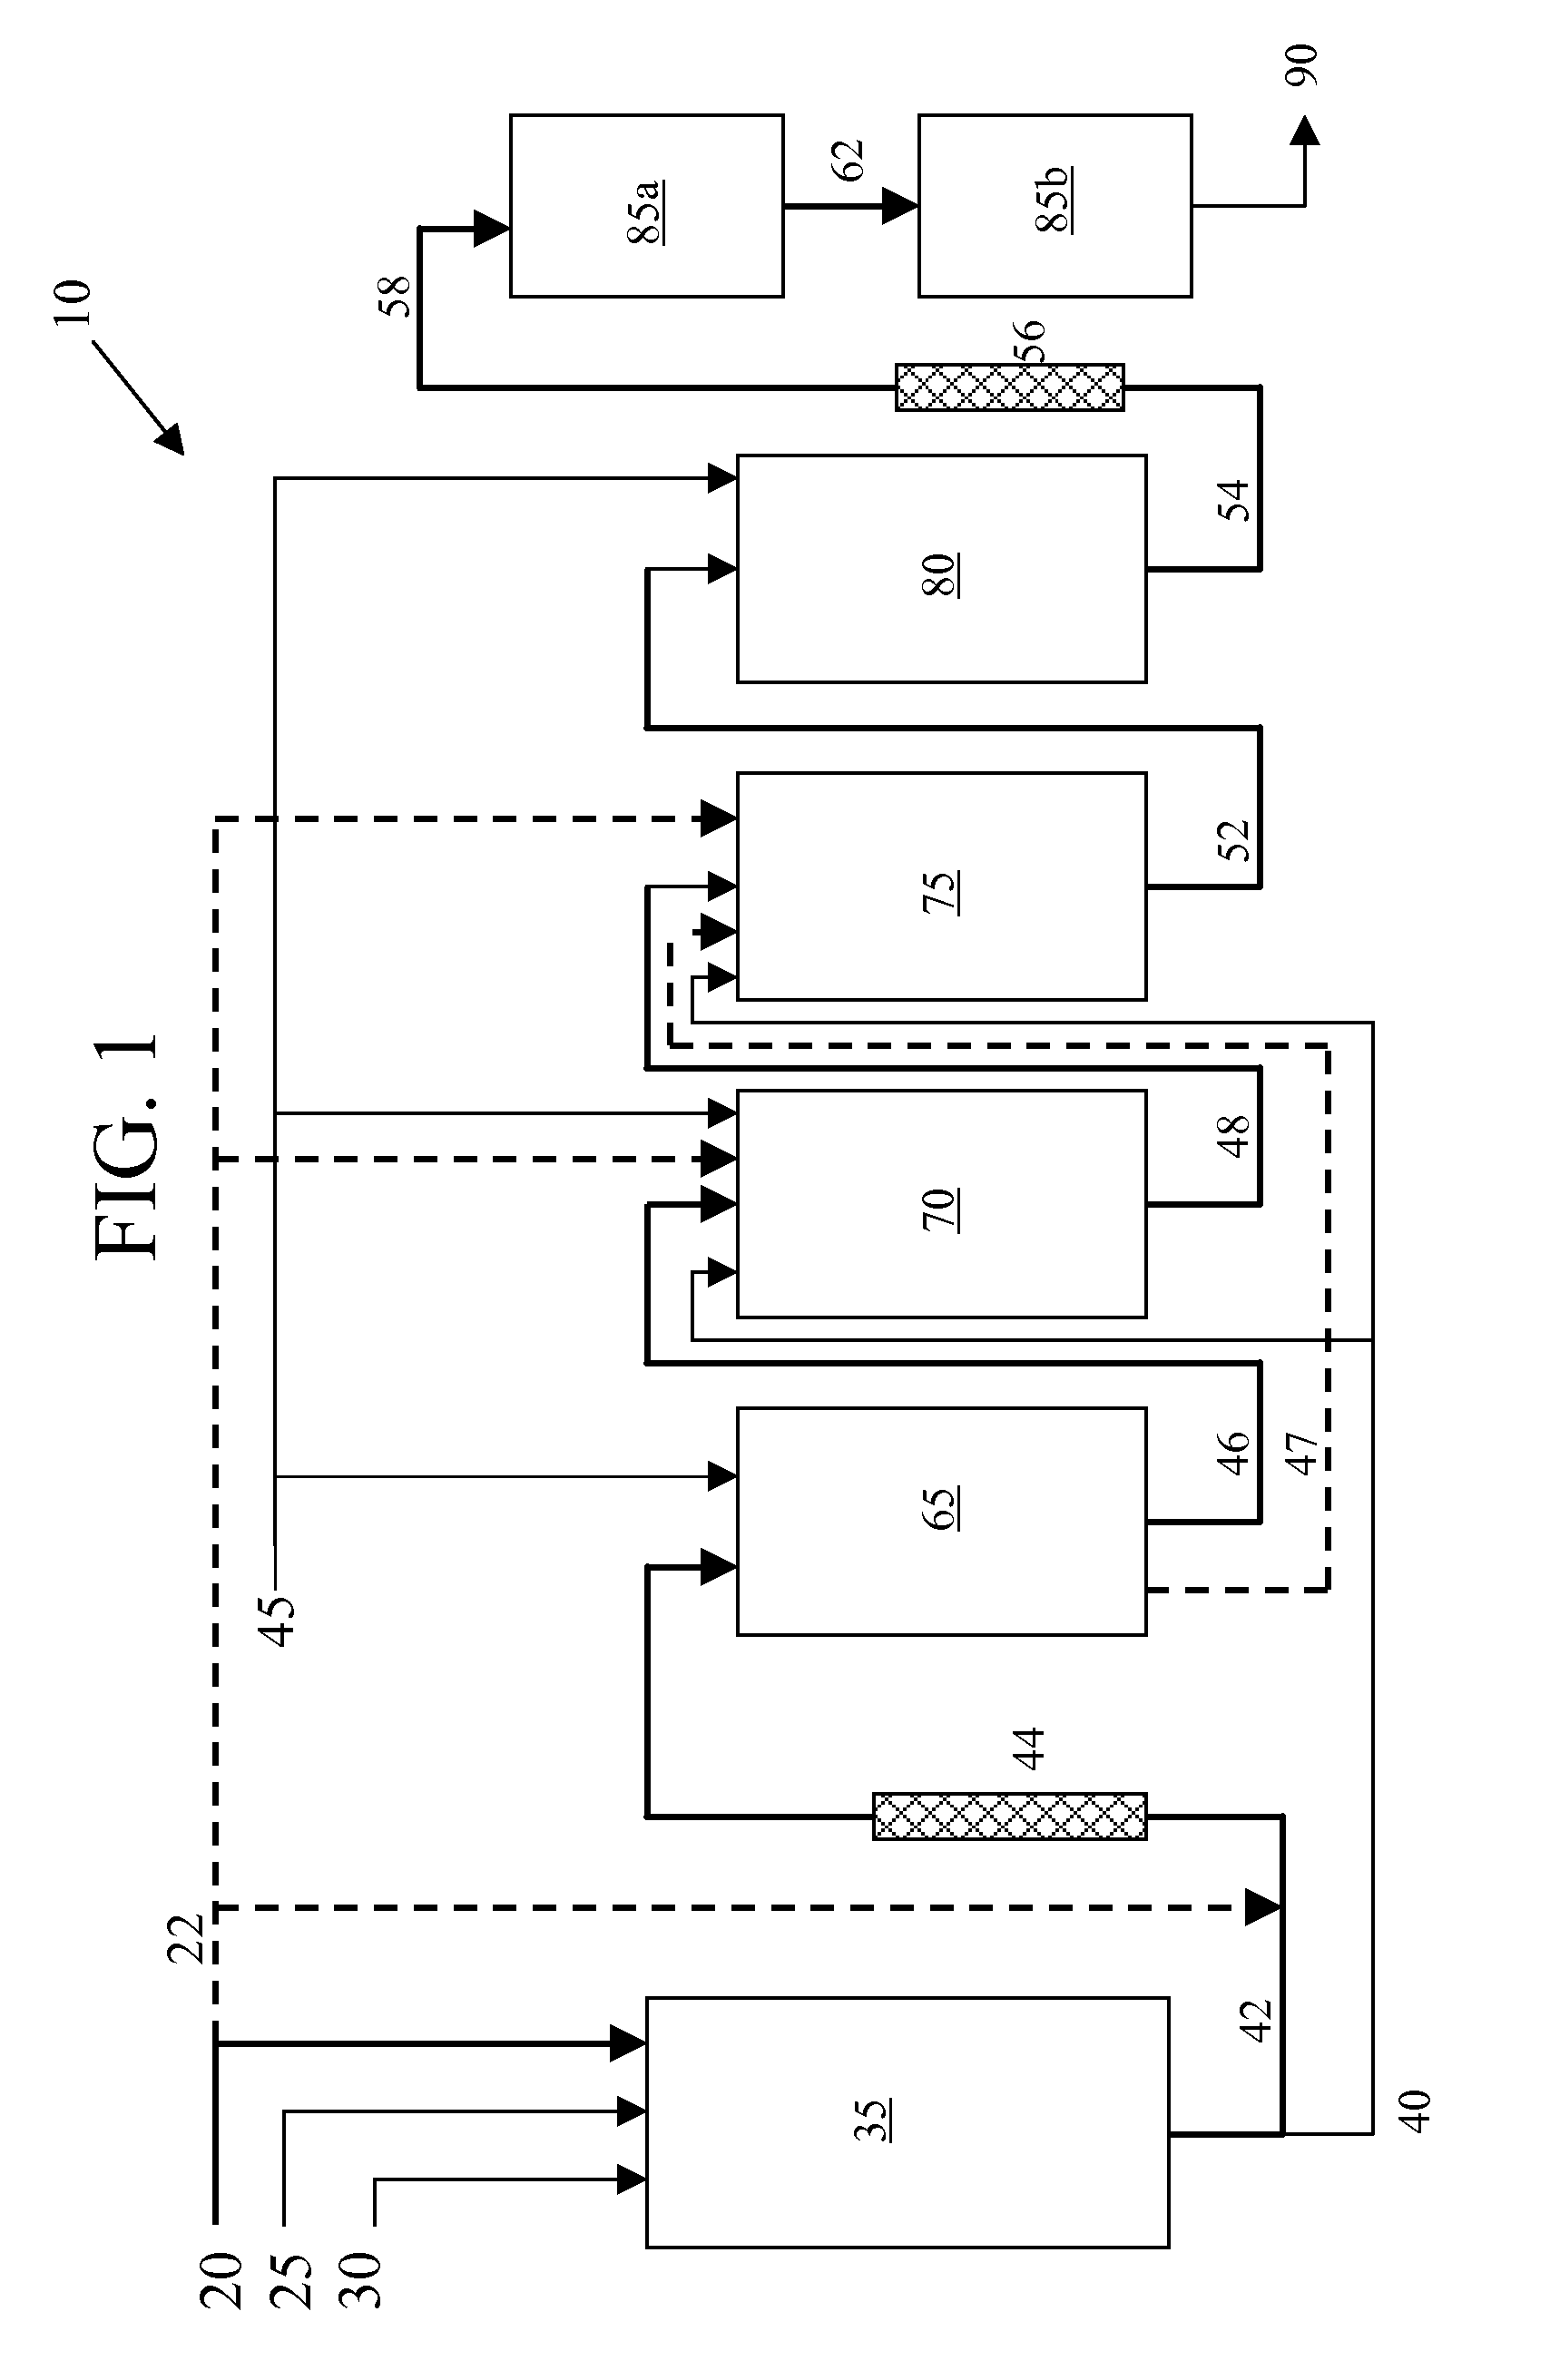 Process for making high impact strength polystyrene and related compositions